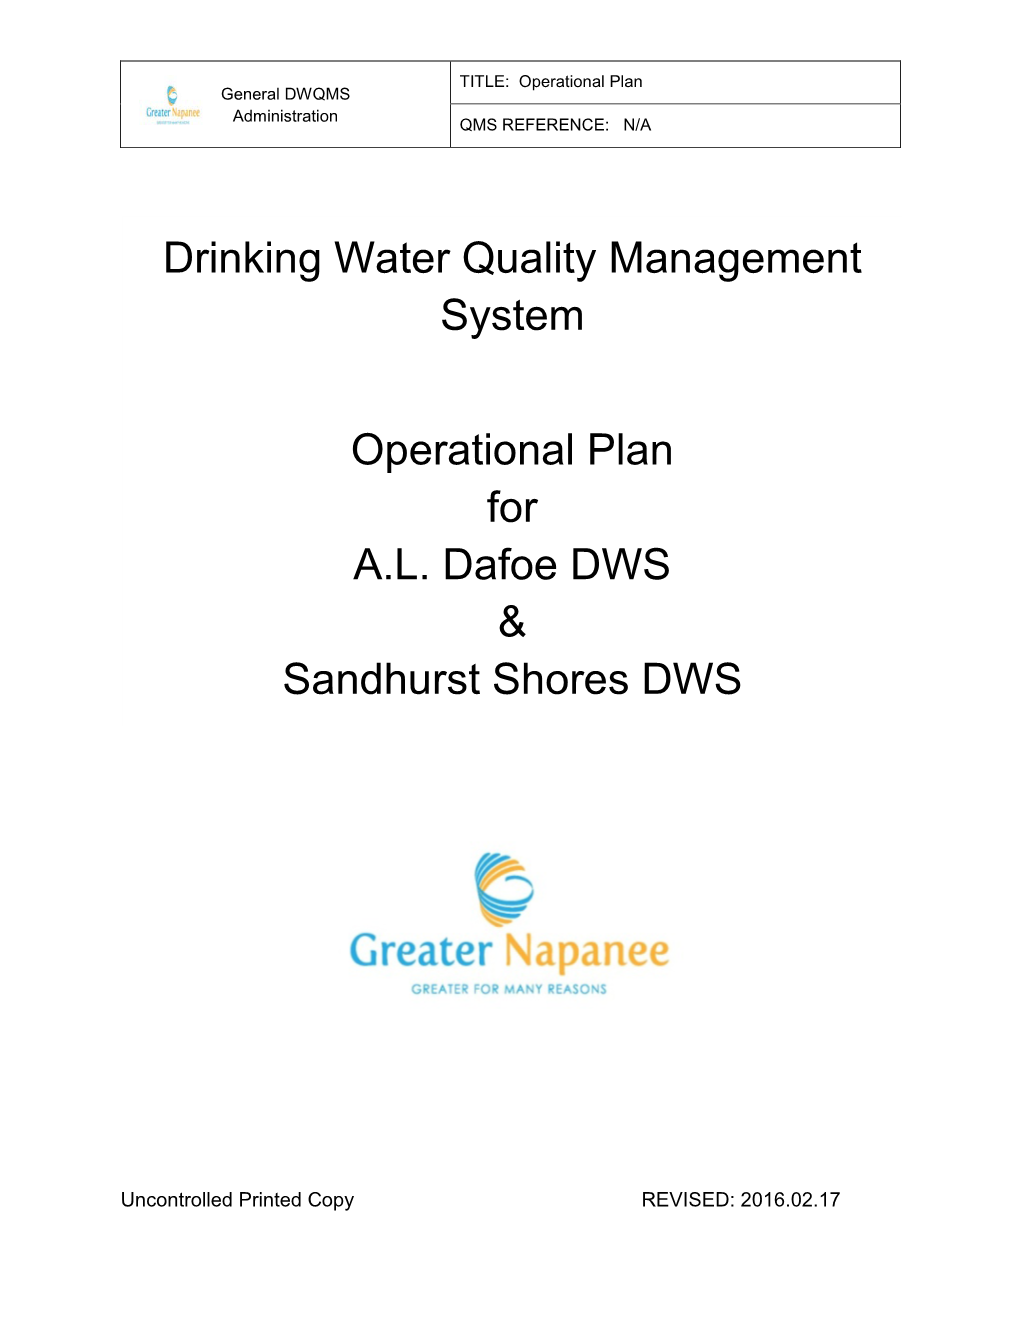 Drinking Water Quality Management System Operational Plan for A.L